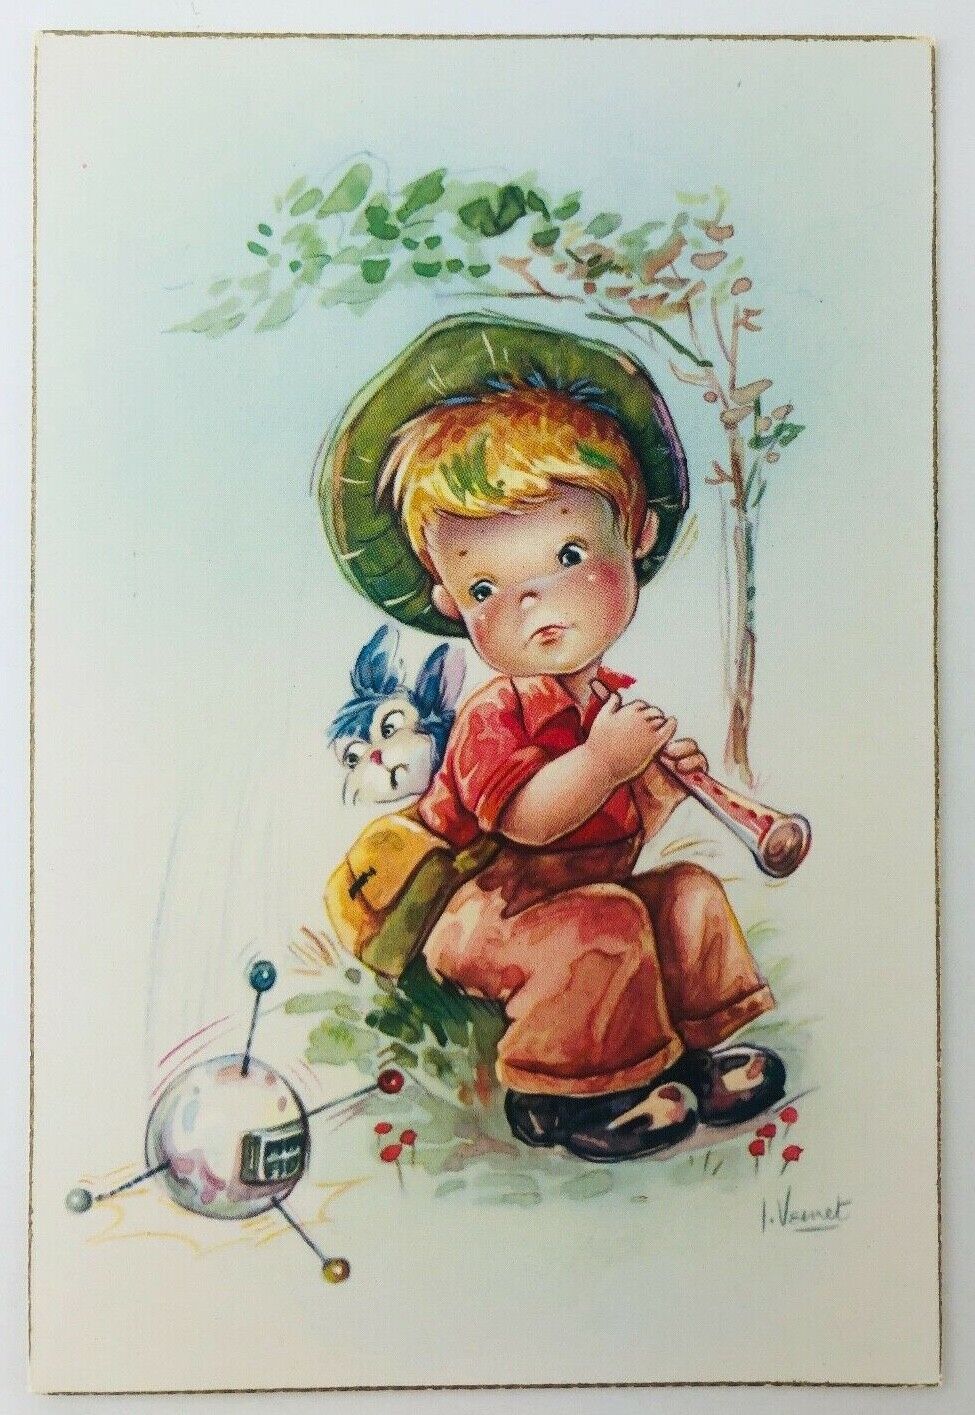 Vtg Little Boy and Rabbit Looking at Something by Artist I. Veinet from Spain